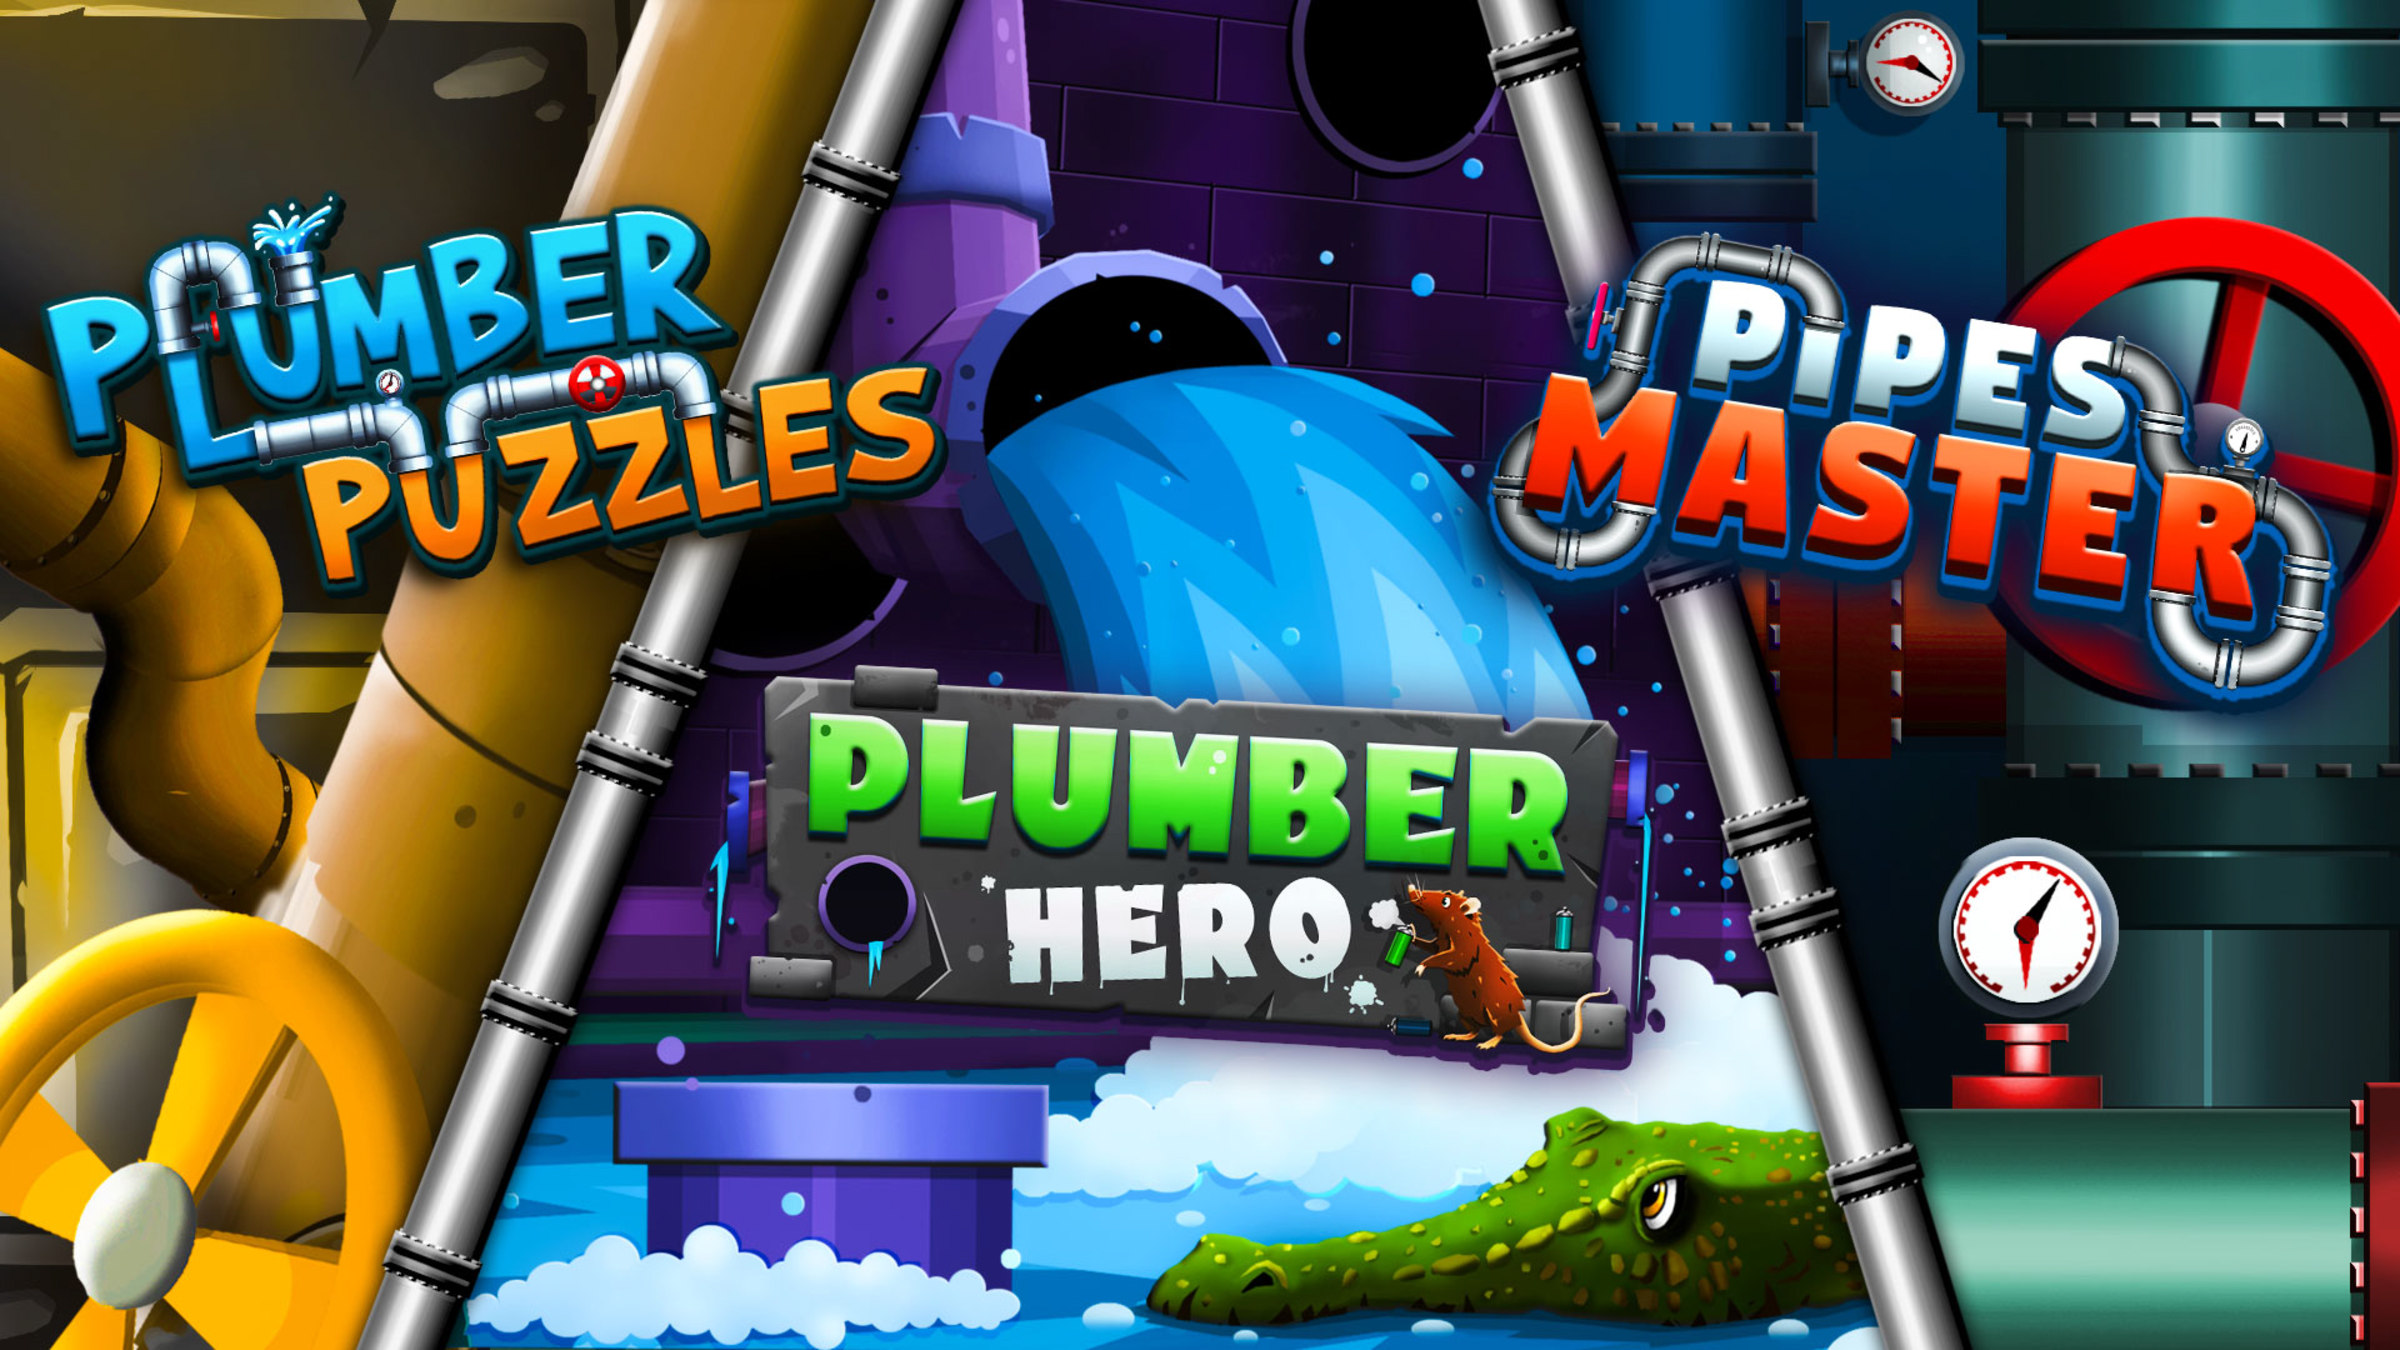 Pipes Master for Nintendo Switch - Nintendo Official Site